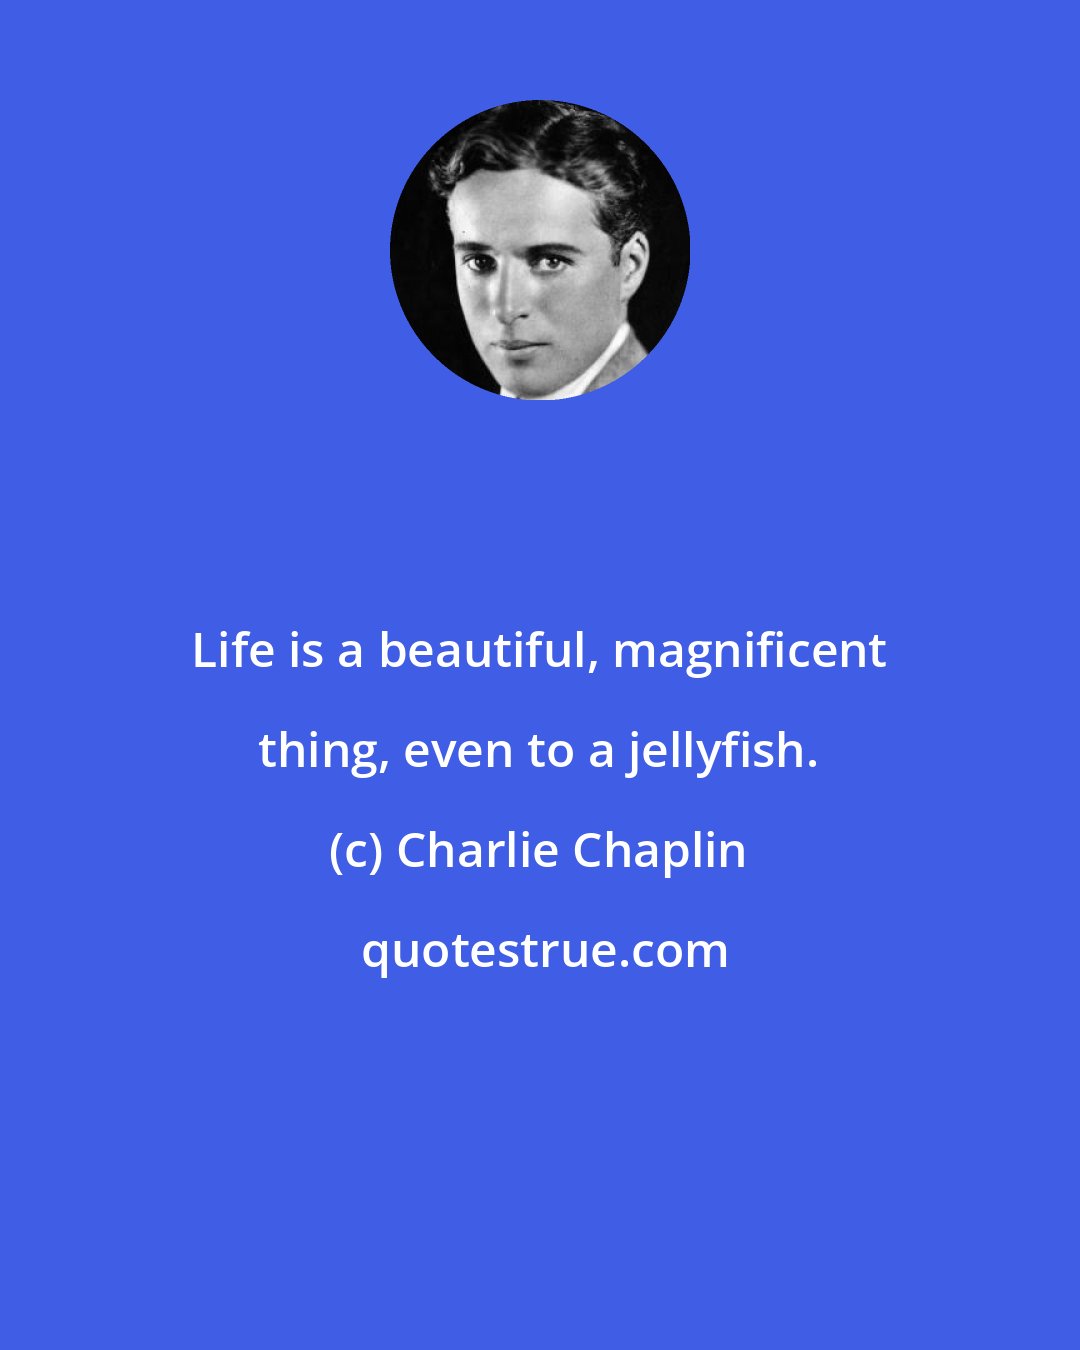 Charlie Chaplin: Life is a beautiful, magnificent thing, even to a jellyfish.